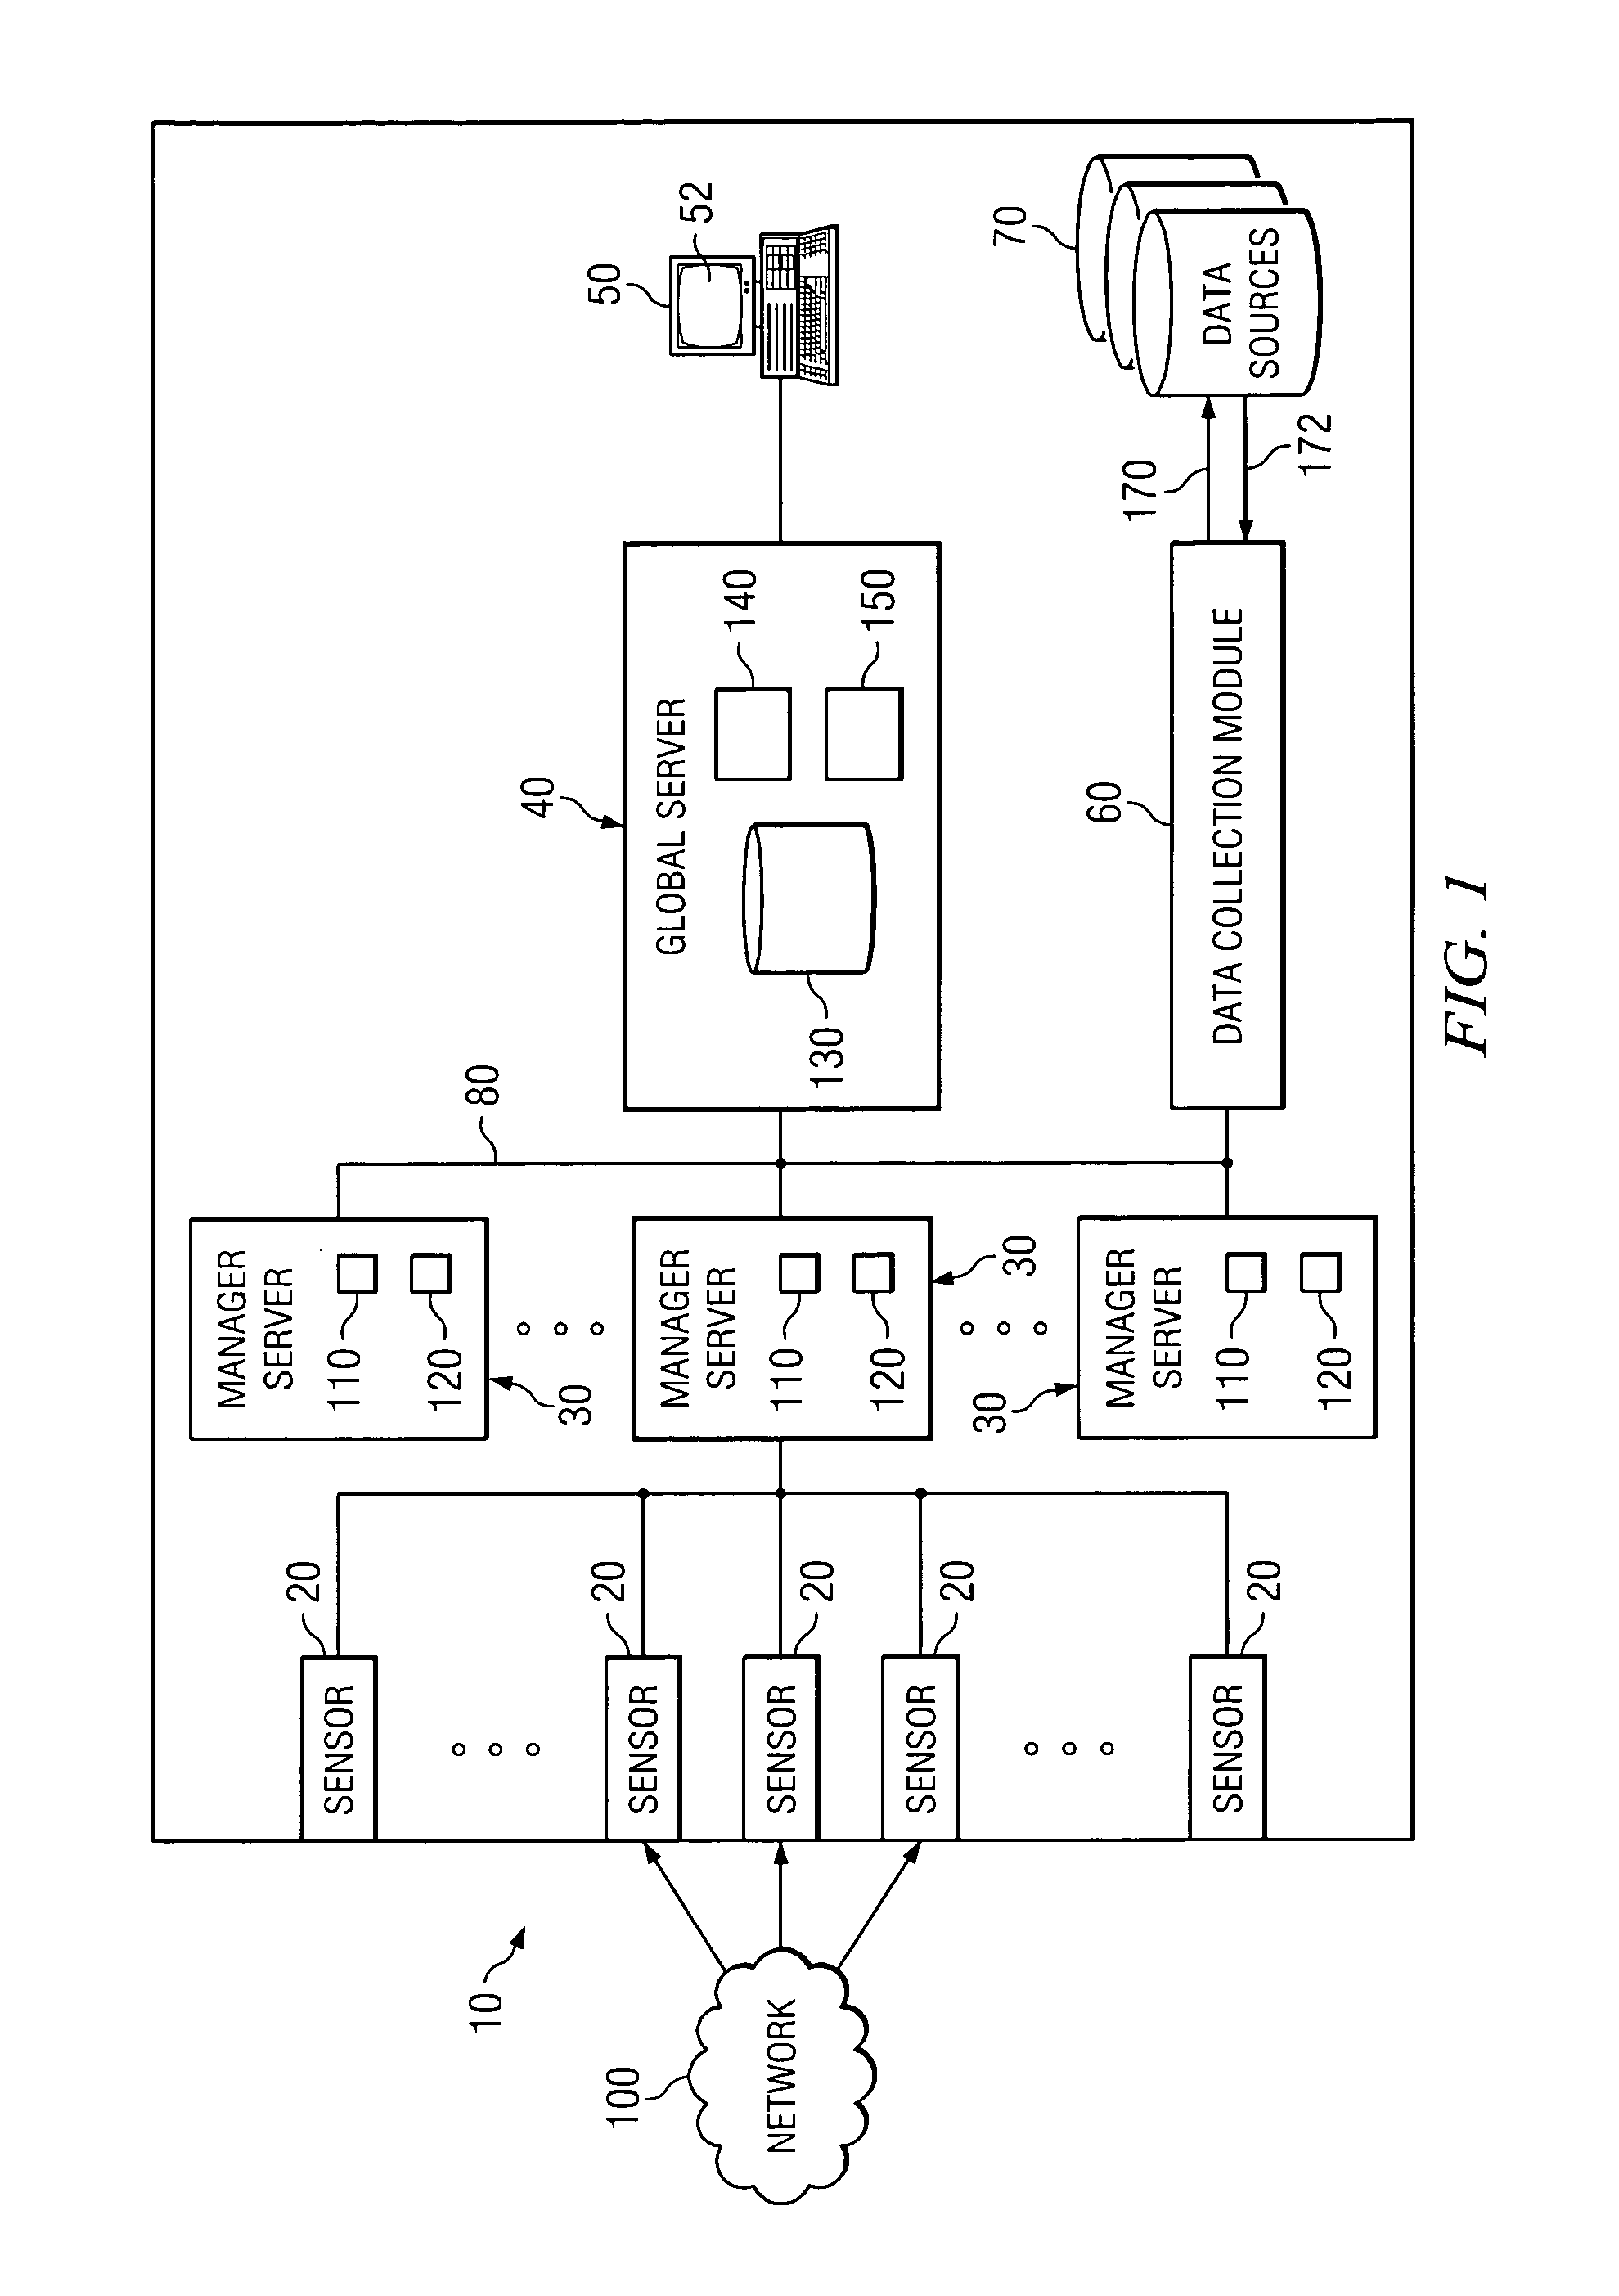 System and method for active data collection in a network security system